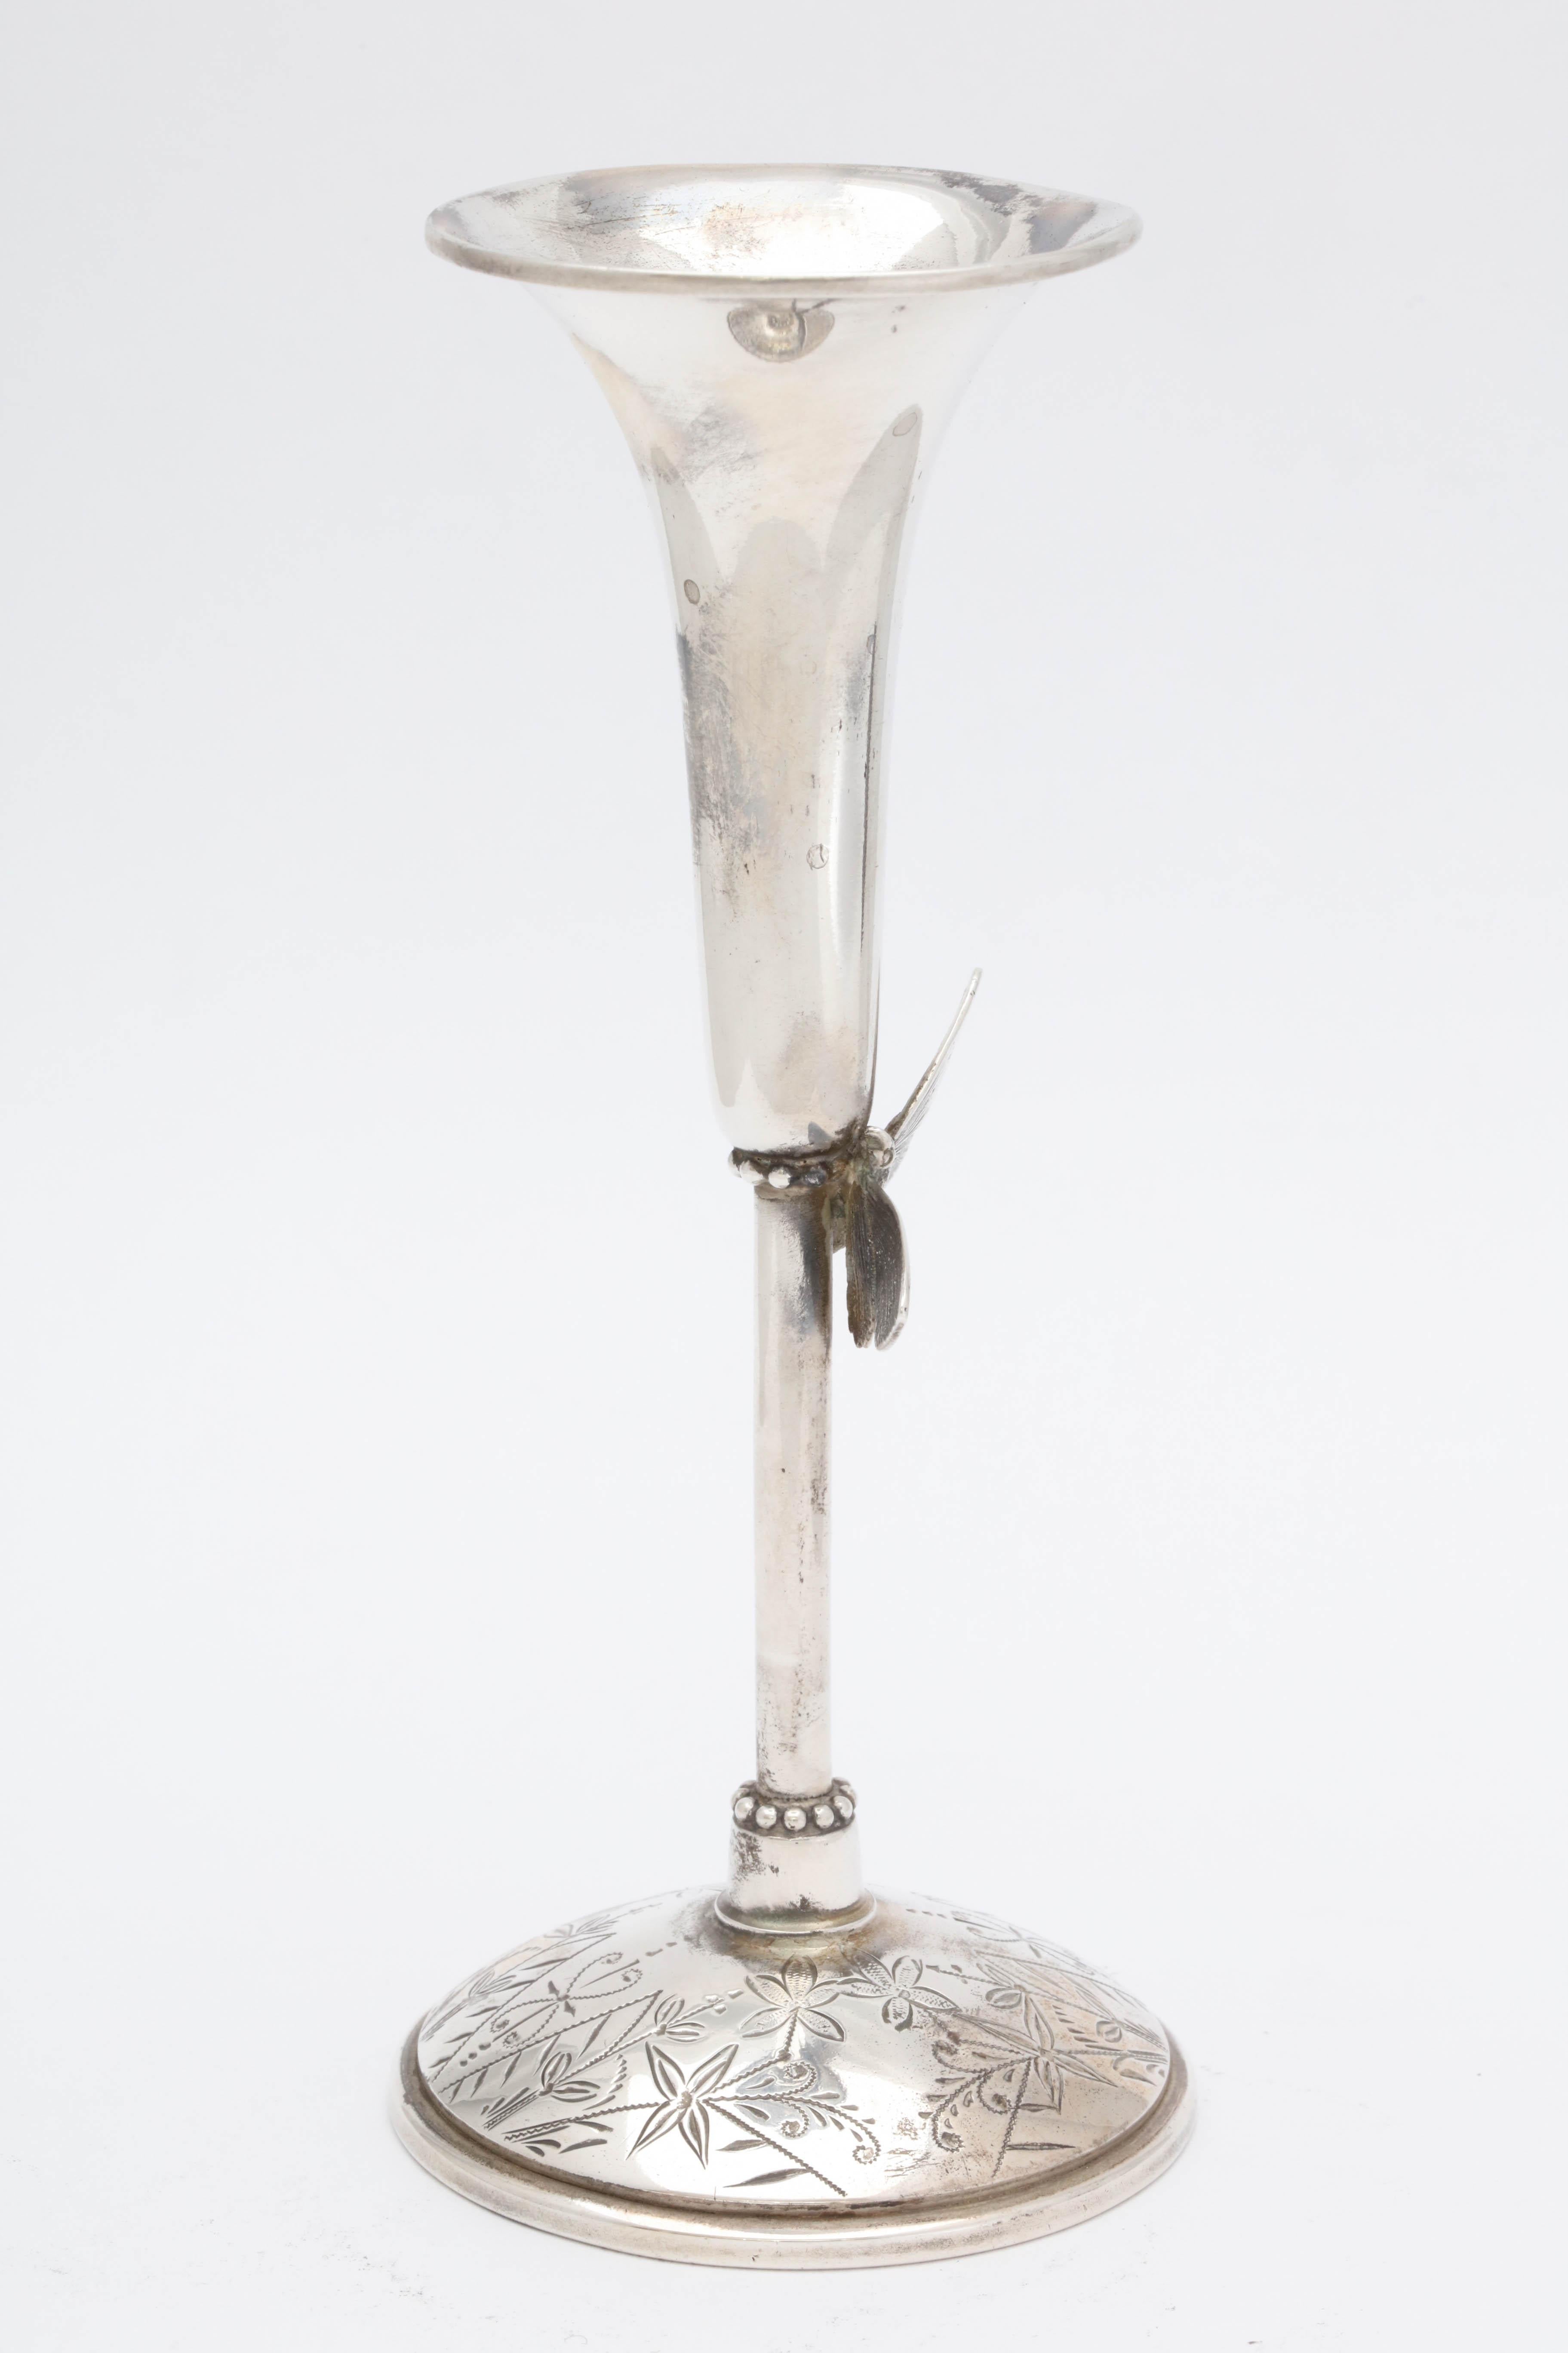 Late 19th Century Aesthetic Movement Sterling Silver Bud Vase by Wood and Hughes